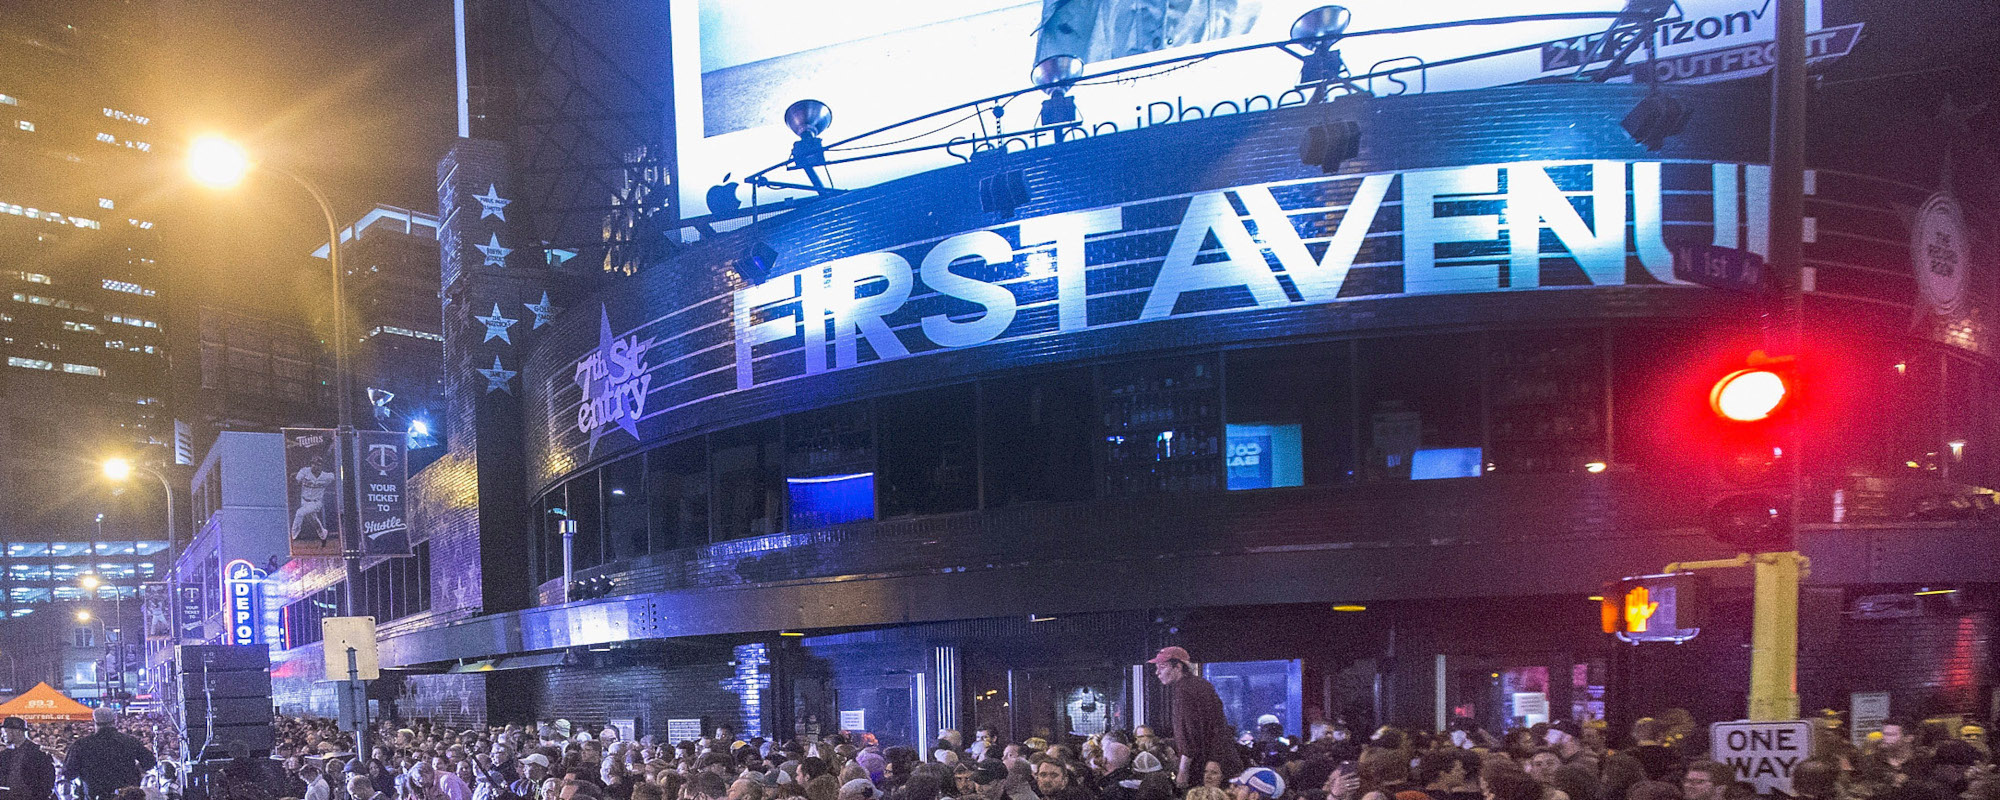 First Avenue, the Venue that Prince Helped to Make Famous, Cancels Dave Chappelle Show Amid Transgender Joke Controversy